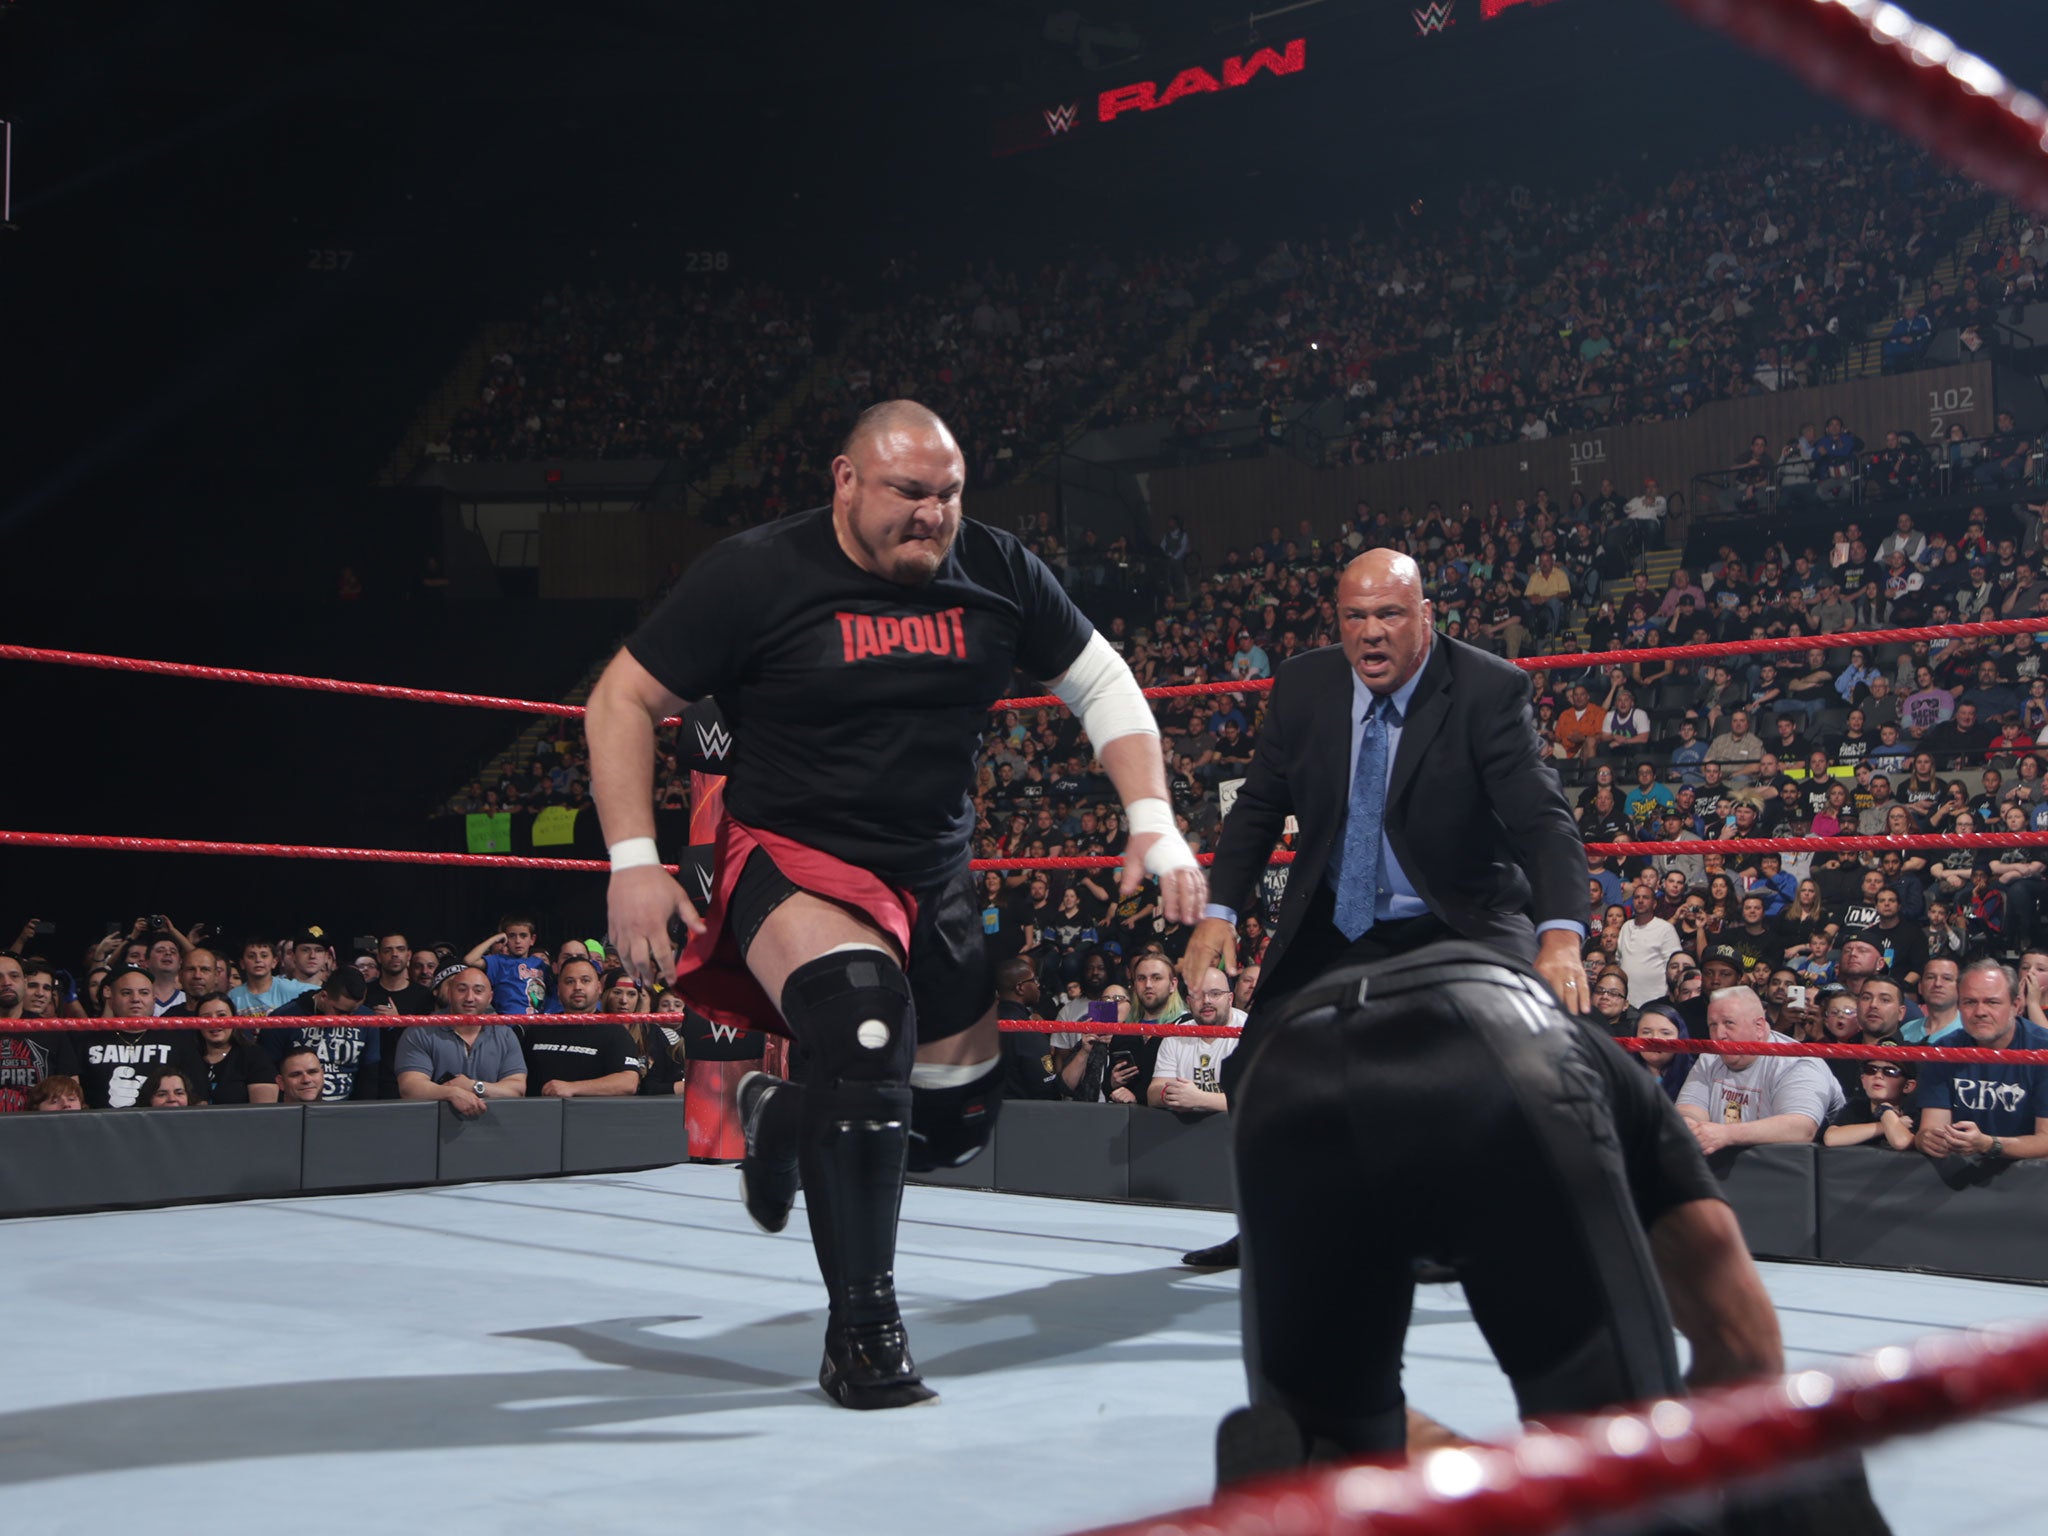 Samoa Joe is expected to dish out a punishing beating to Seth Rollins